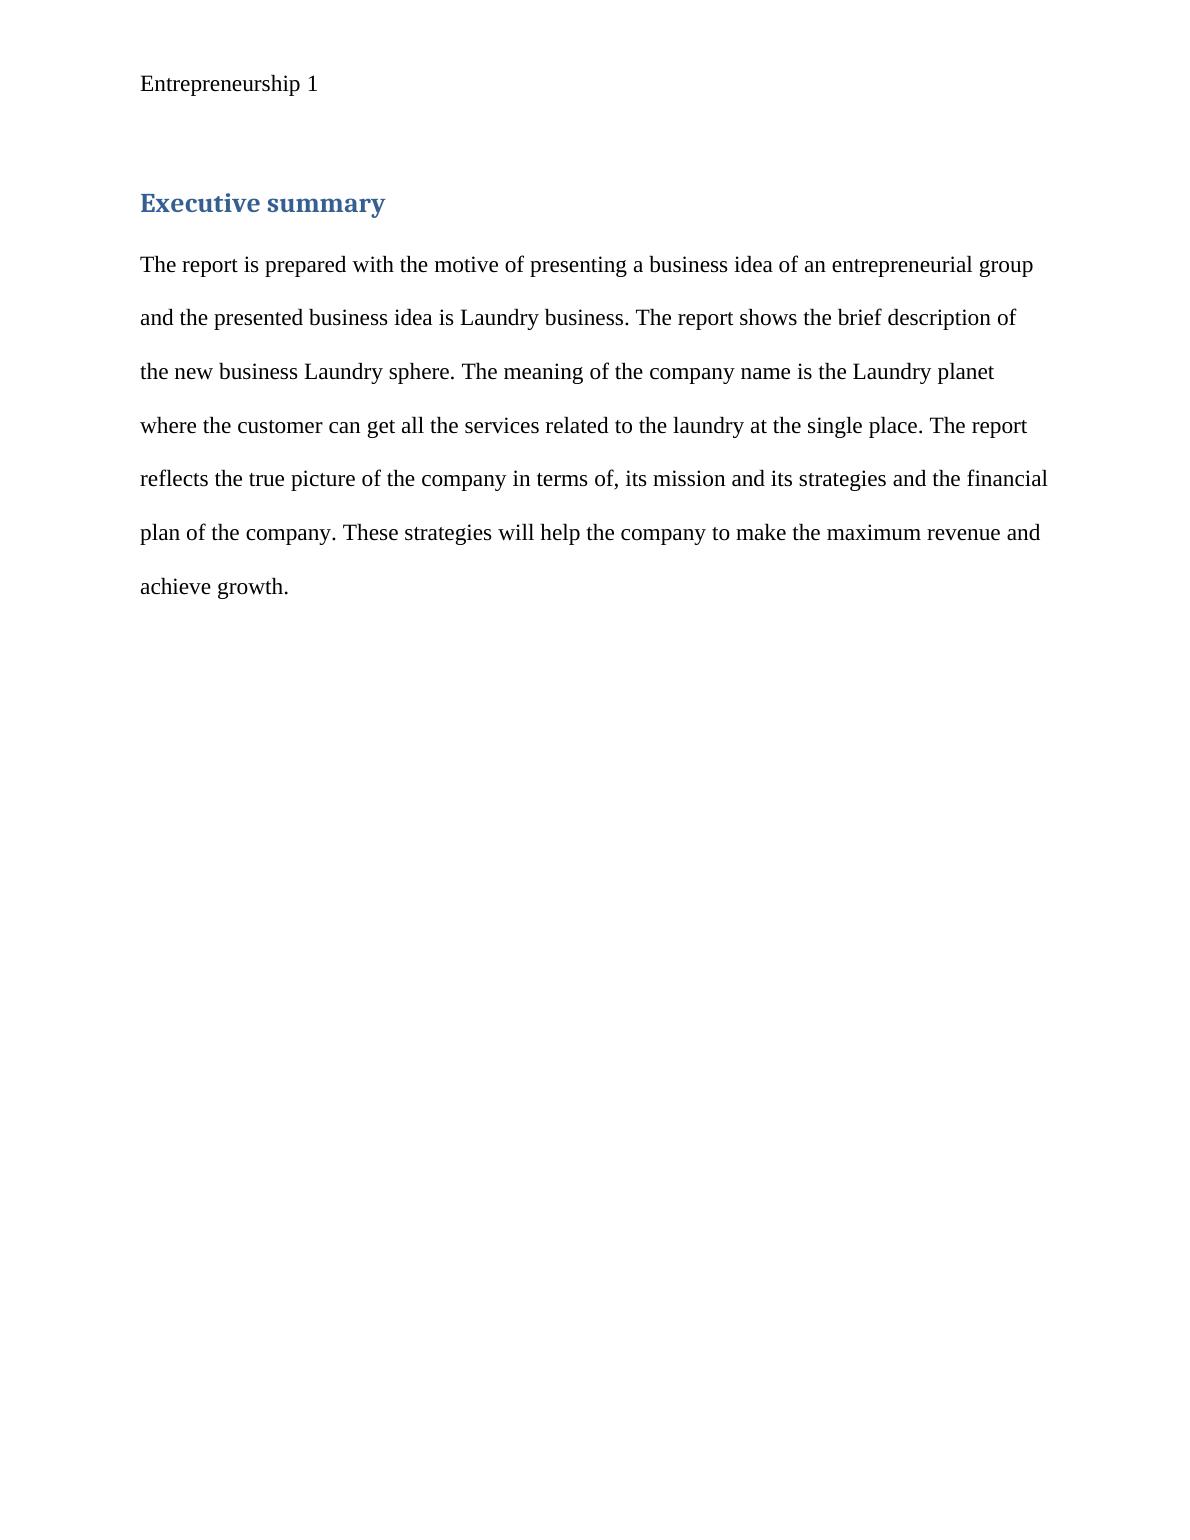 Report on Business Idea of an Entrepreneurial Group_2